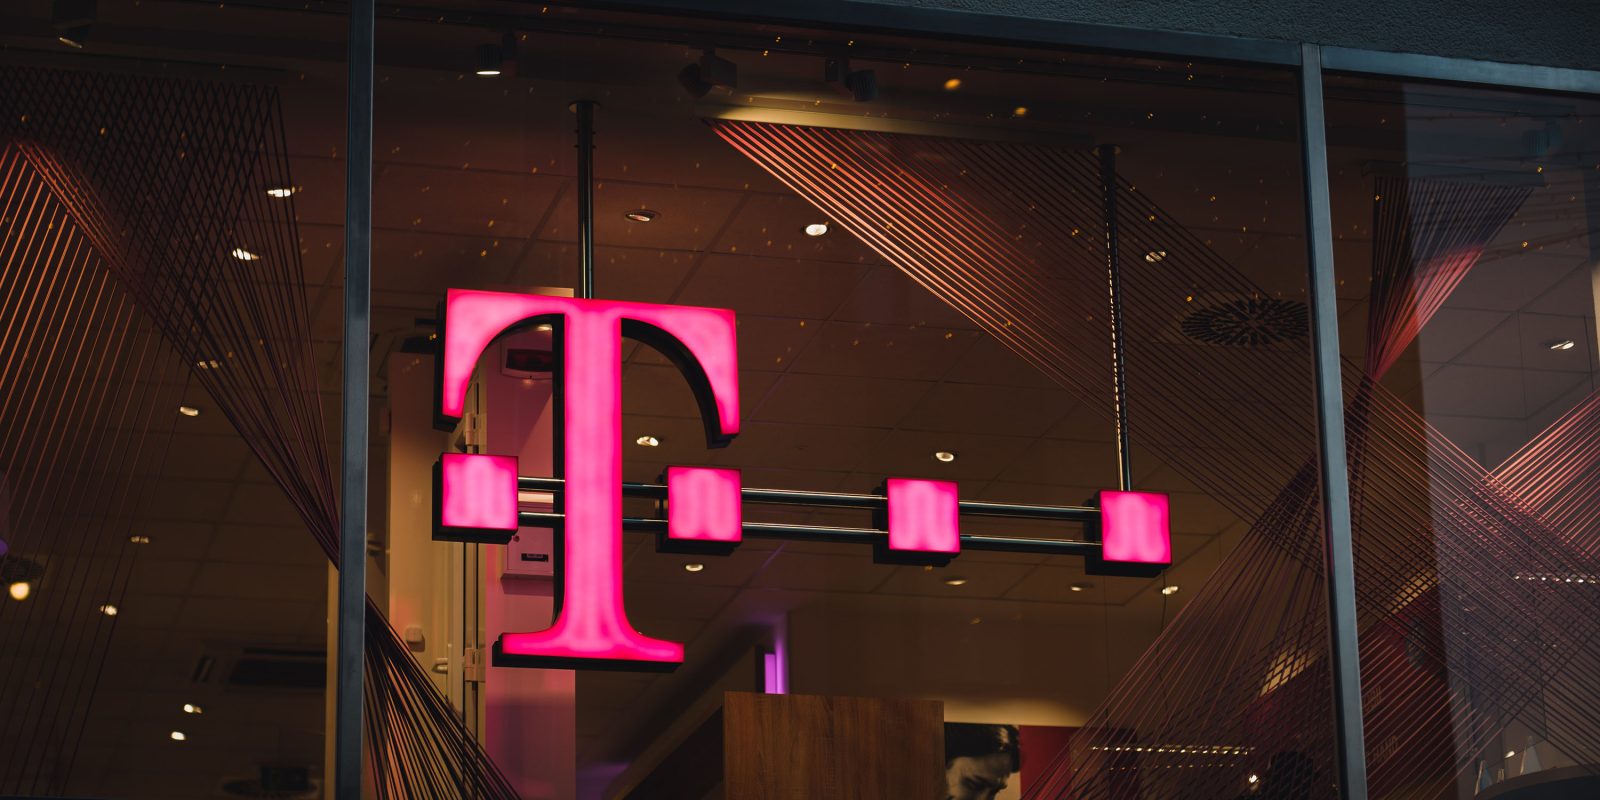 Hacker selling full data from 100M T-Mobile customers